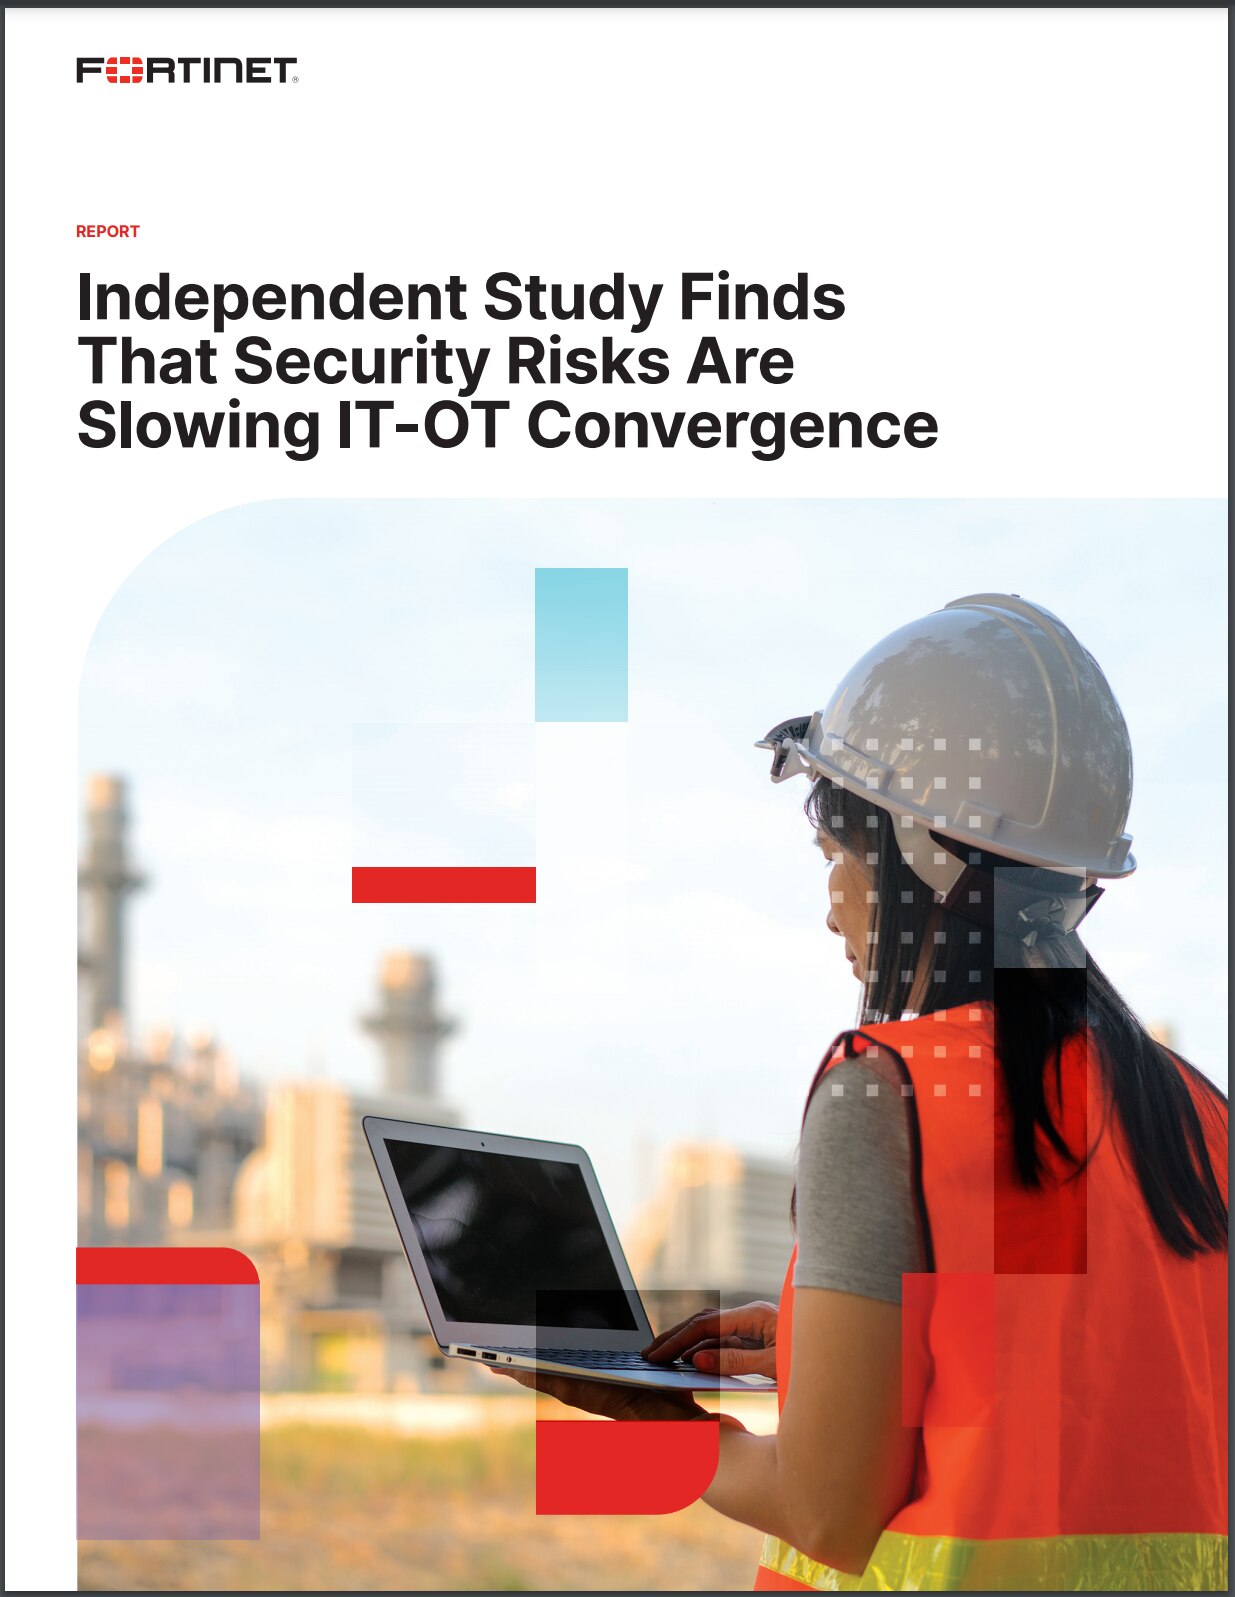 Report-Independent Study Finds That Security Risks Are Slowing IT-OT Convergence (sold in package, 10pc per package)